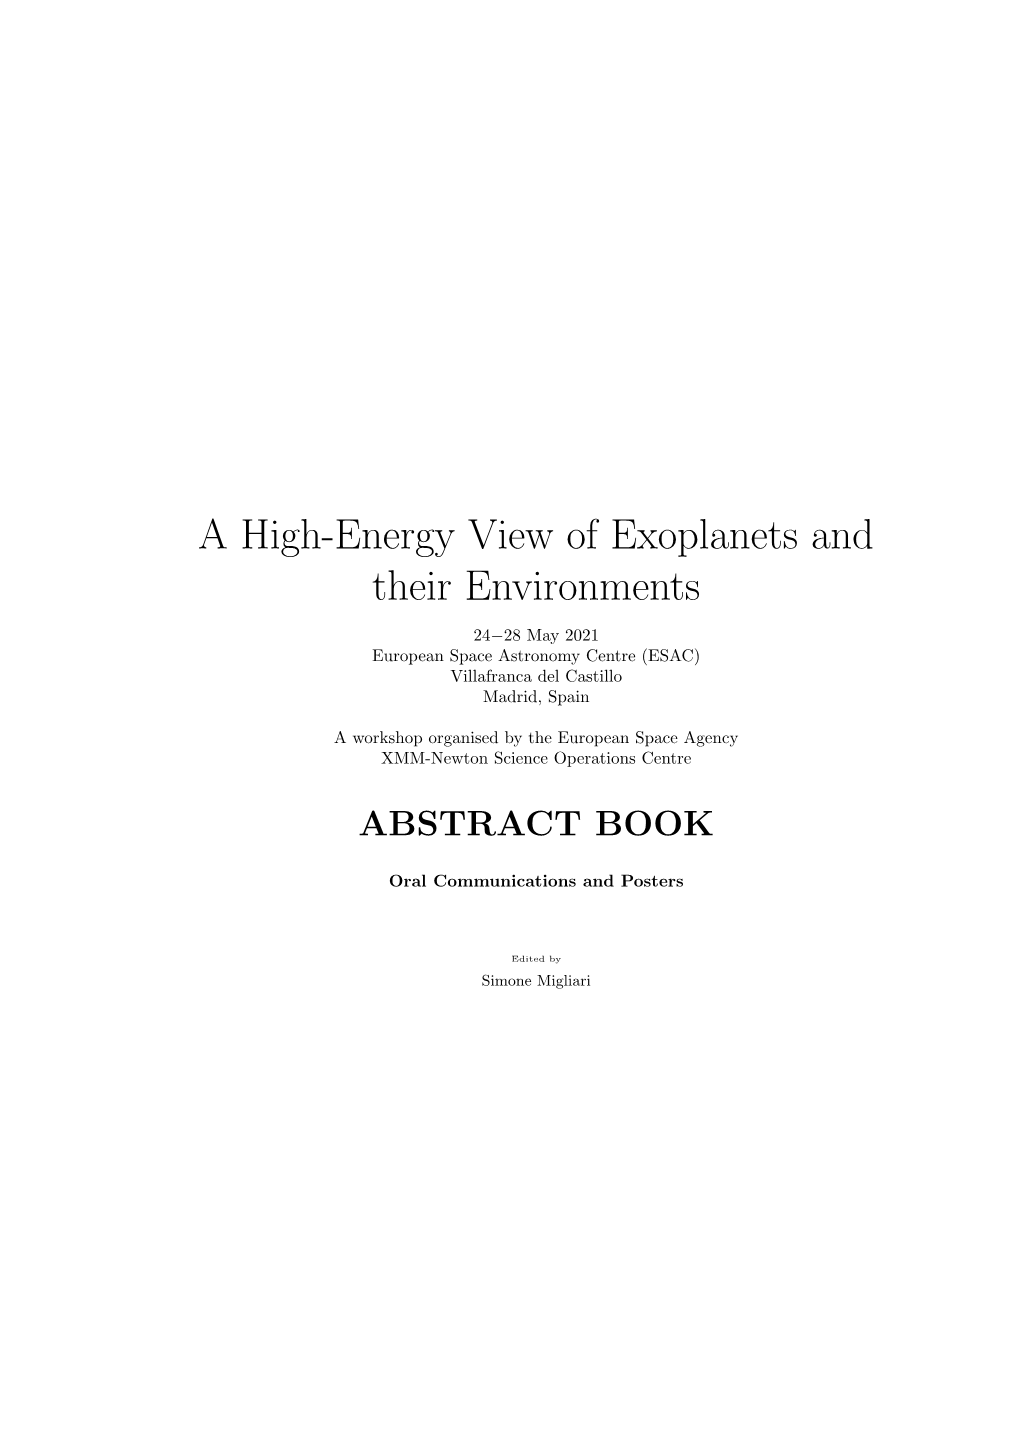 A High-Energy View of Exoplanets and Their Environments